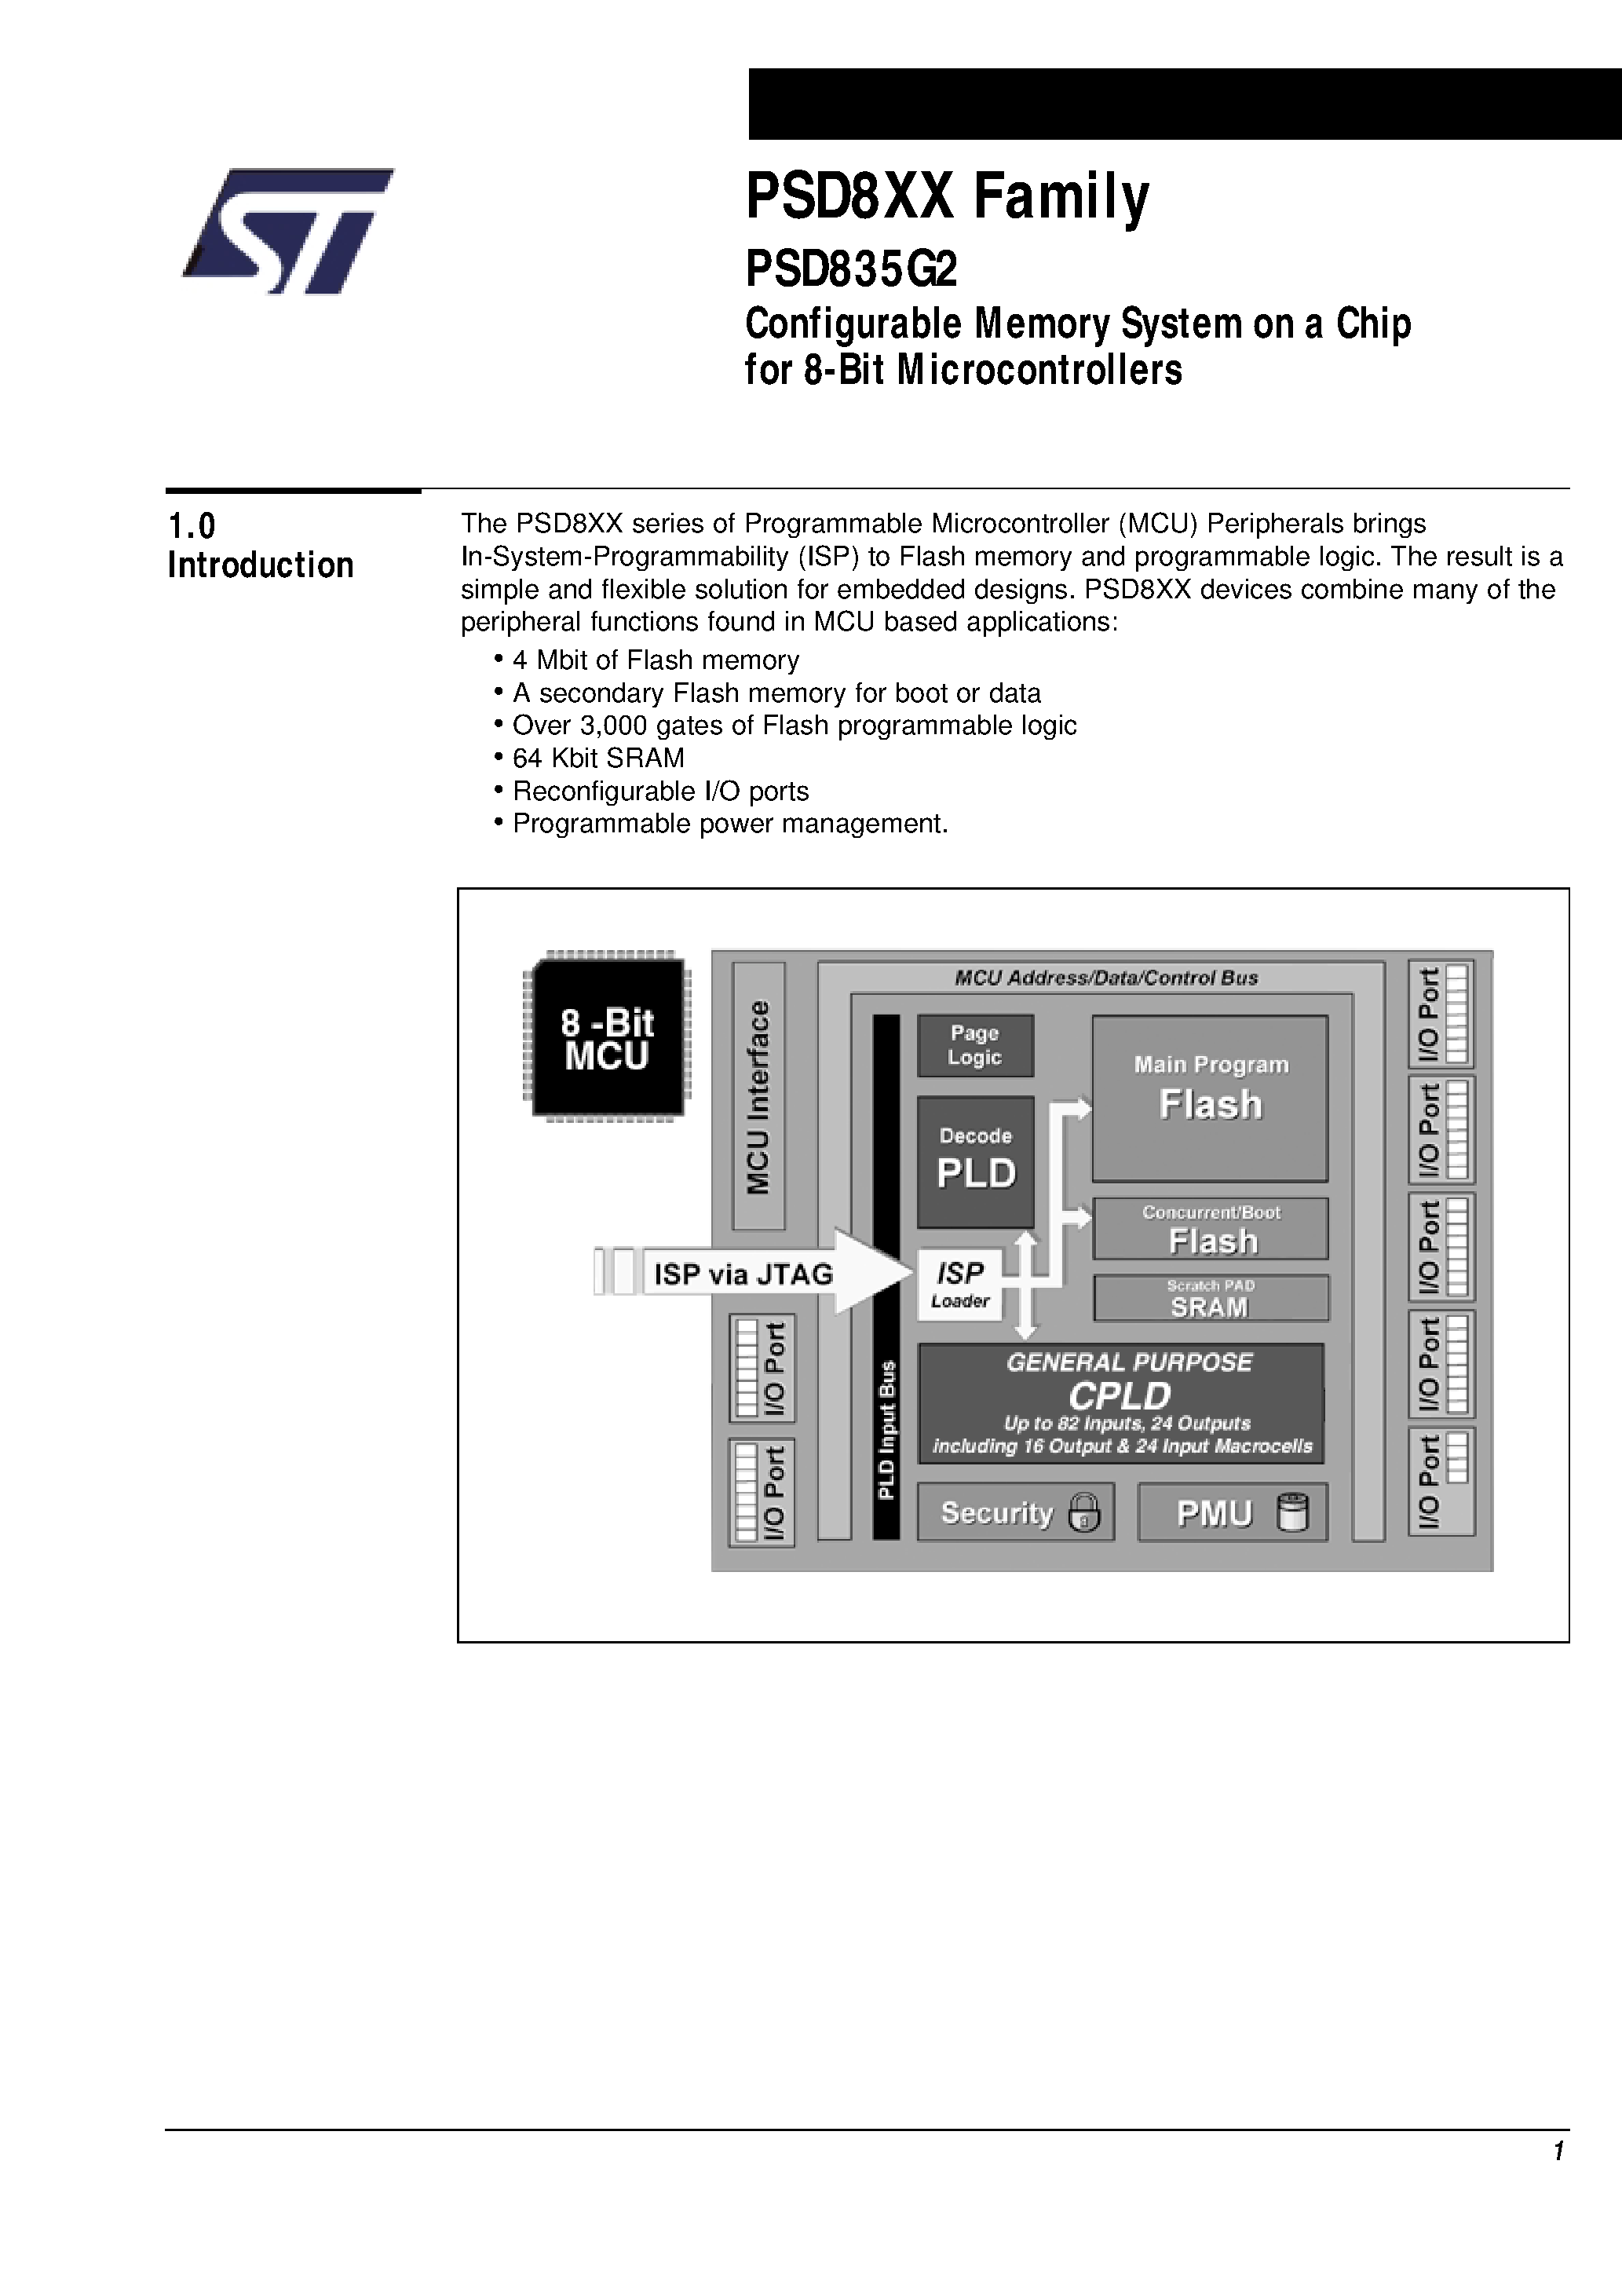 Datasheet PSD835F1-A-70MI - Configurable Memory System on a Chip for 8-Bit Microcontrollers page 2